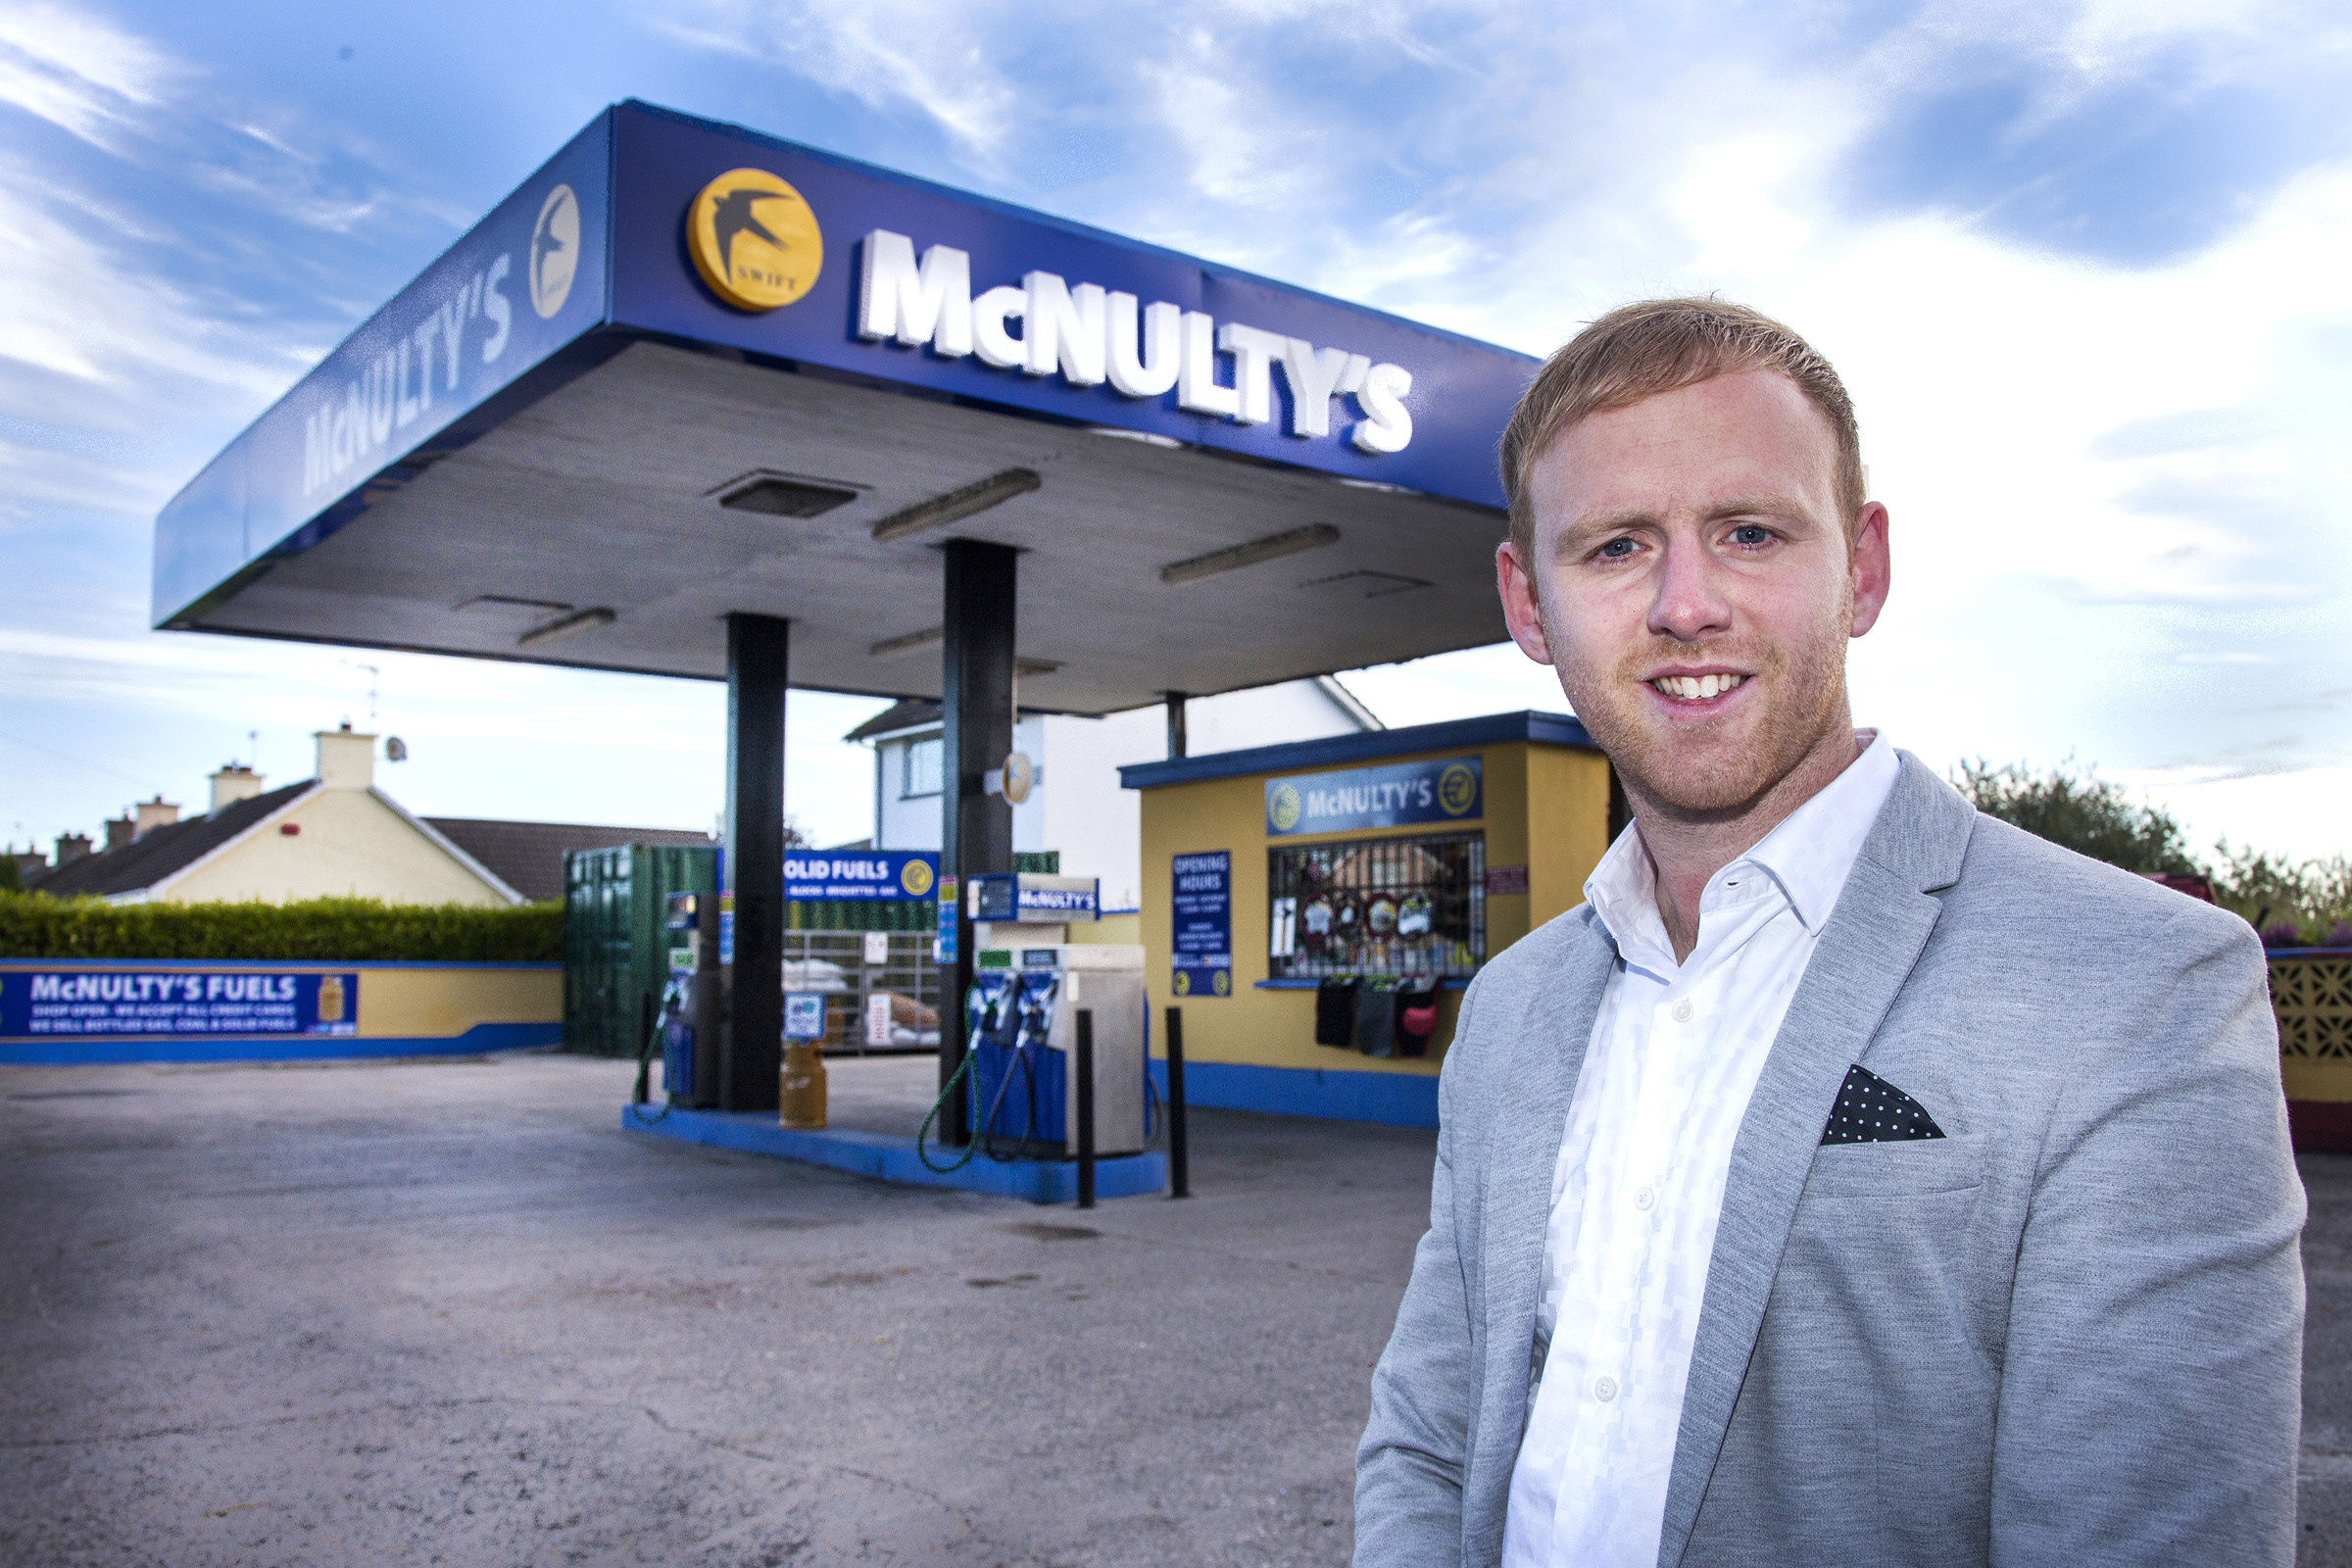 McNulty’s business becomes rock of Hospital